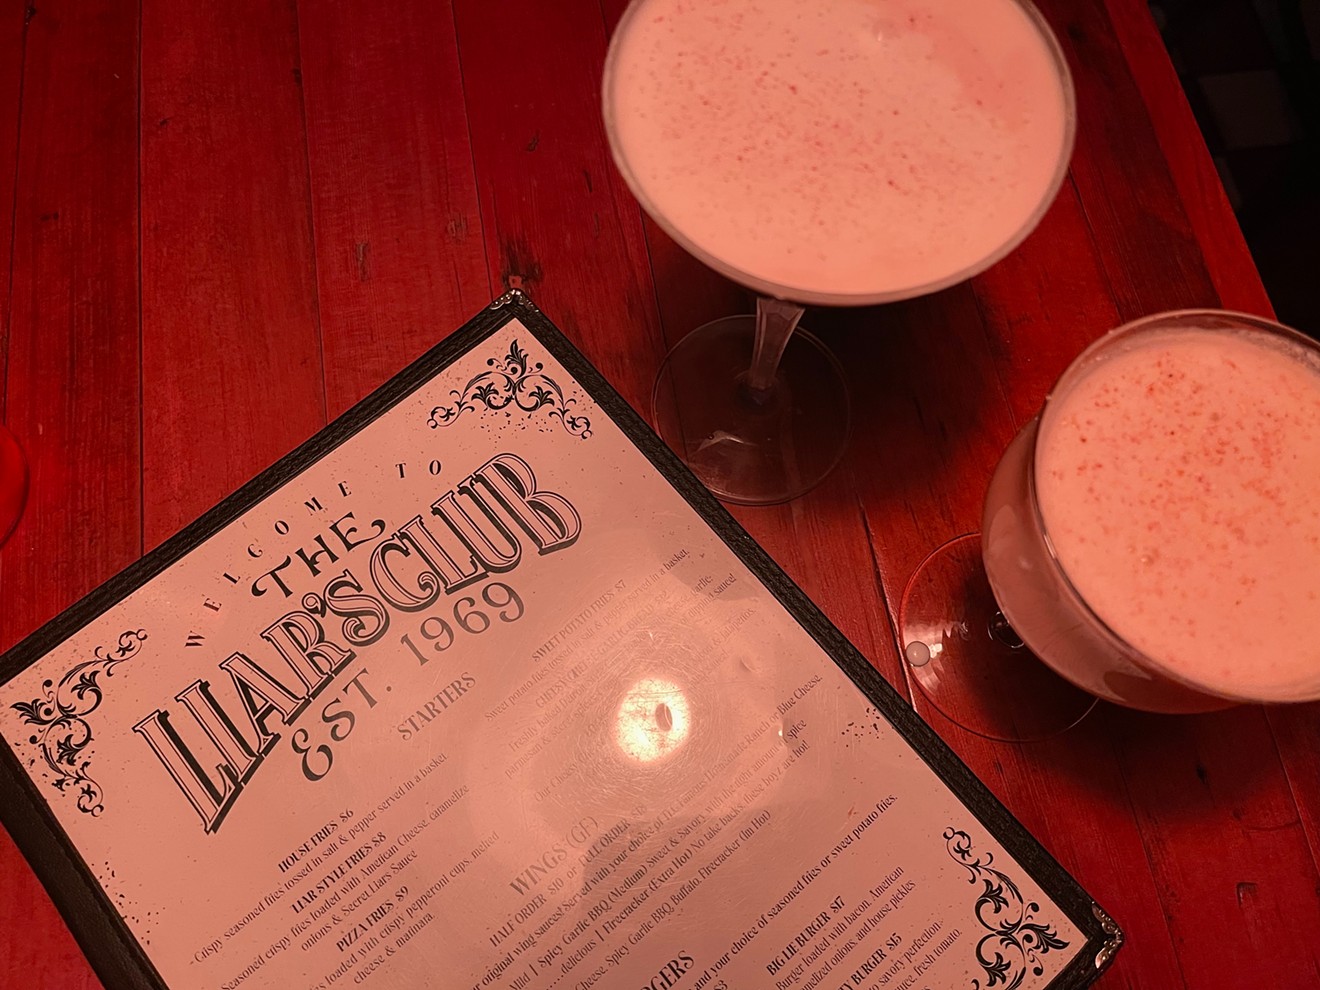 Liar's Club sold craft cocktails and Detroit-style pizza. The bar and restaurant is now closed.